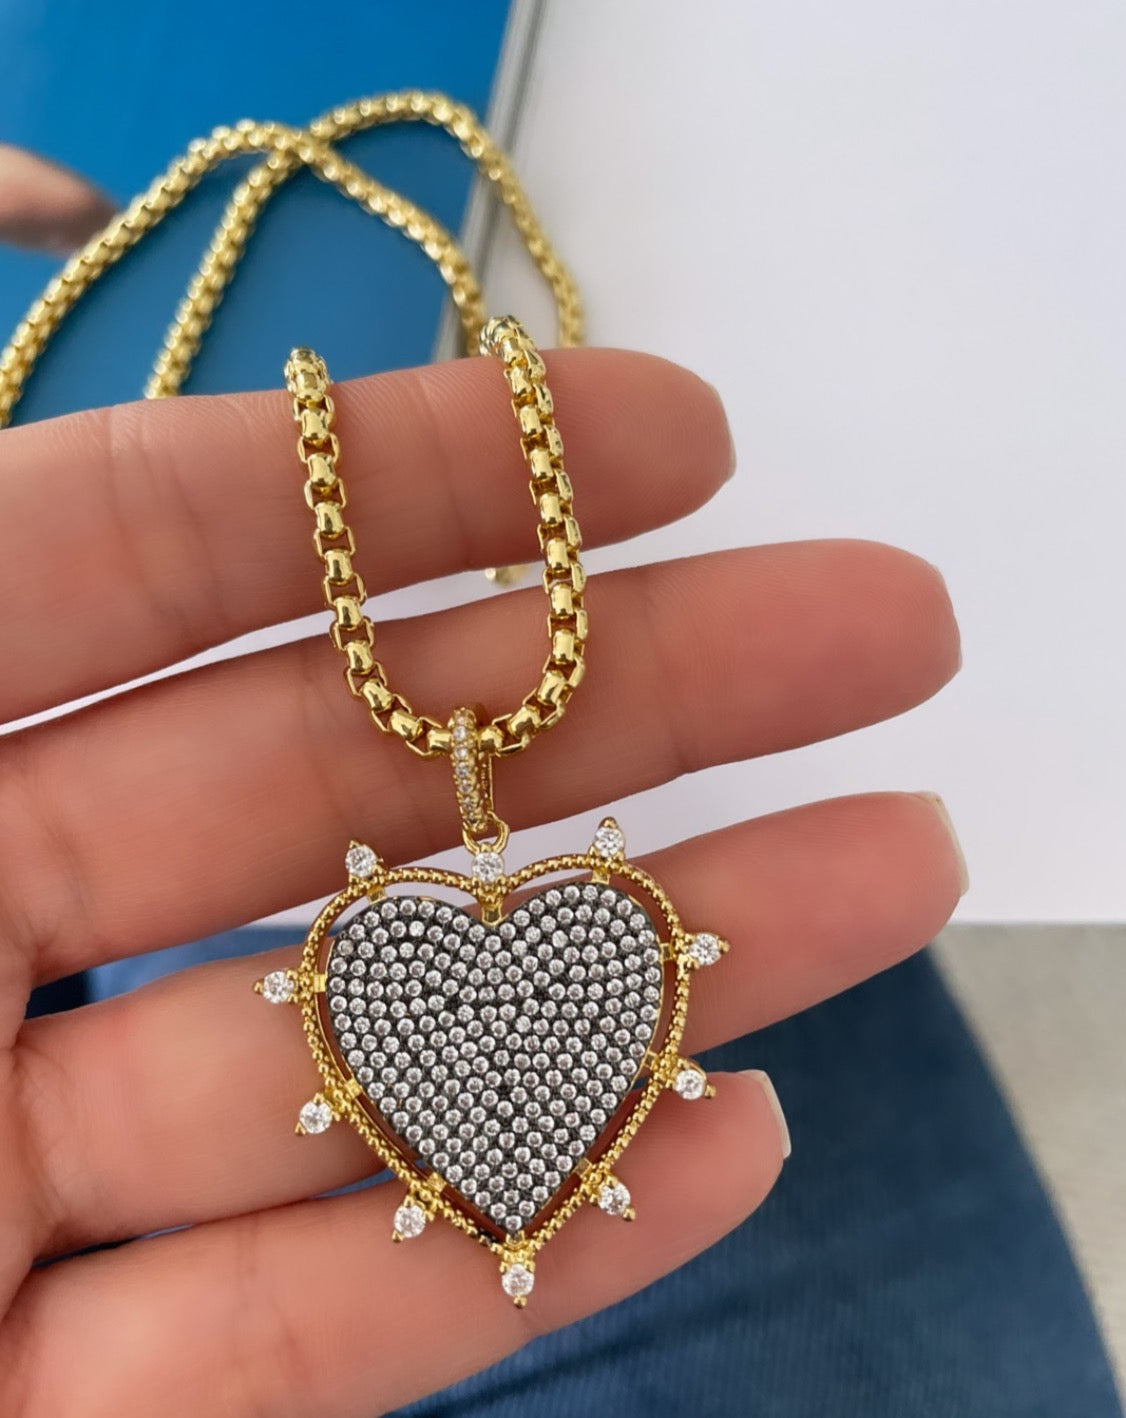 Heart Necklace - LimaLimón Store